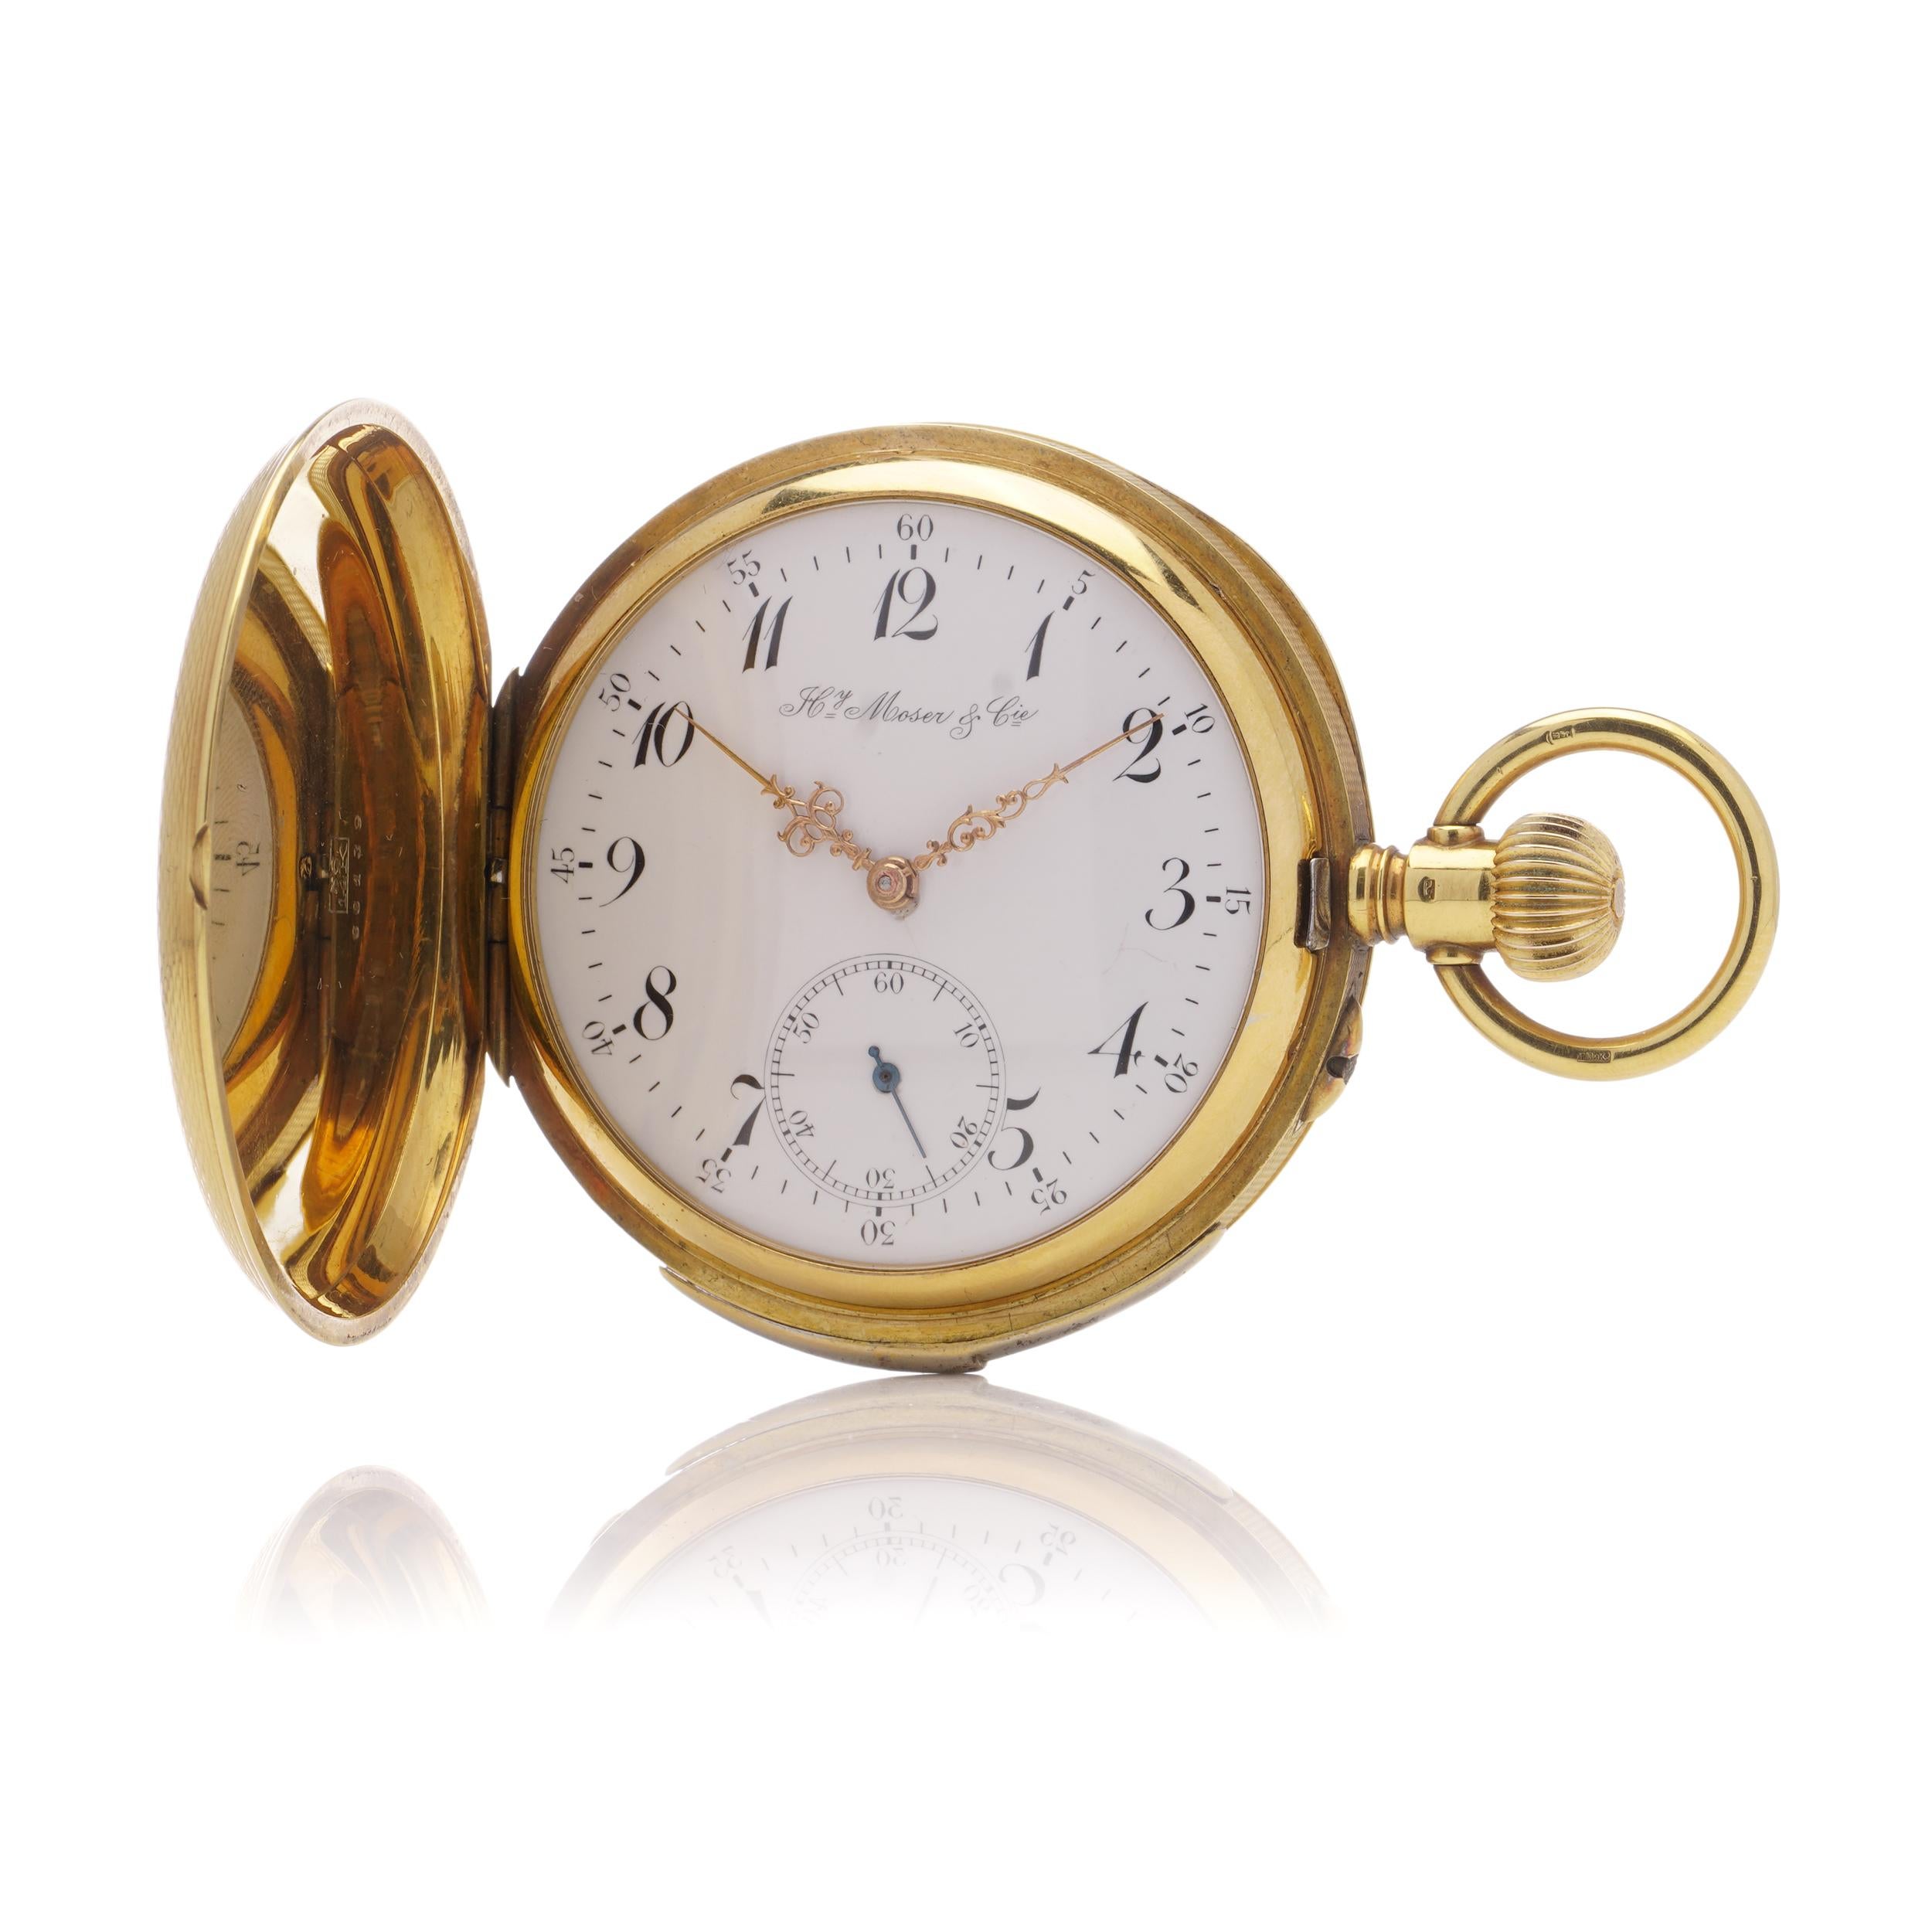 Hy Moser & Cie. 14kt gold quarter-repeater full hunter keyless pocket watch For Sale 3